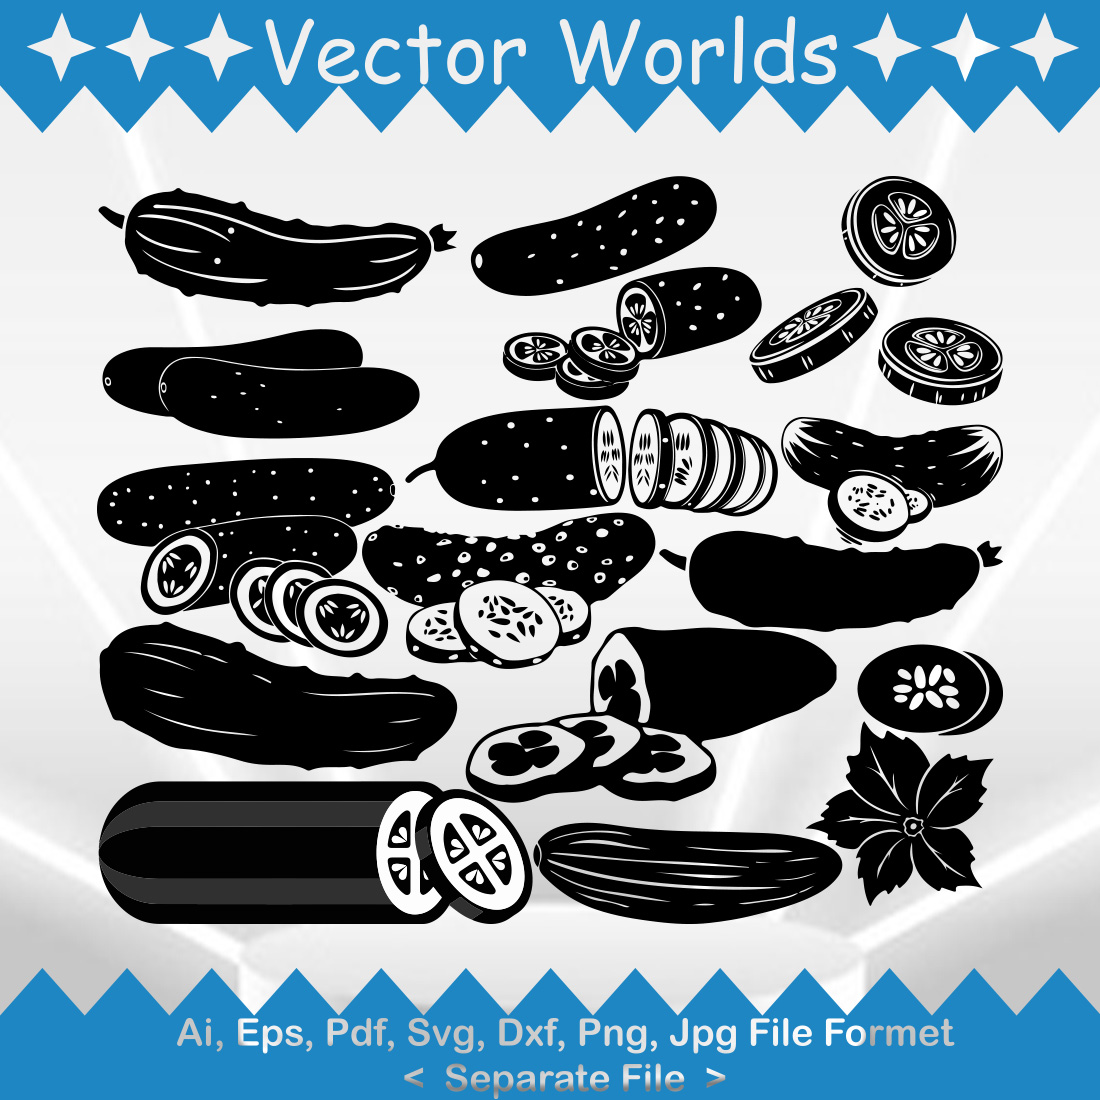 Cucumber SVG Vector Design cover image.